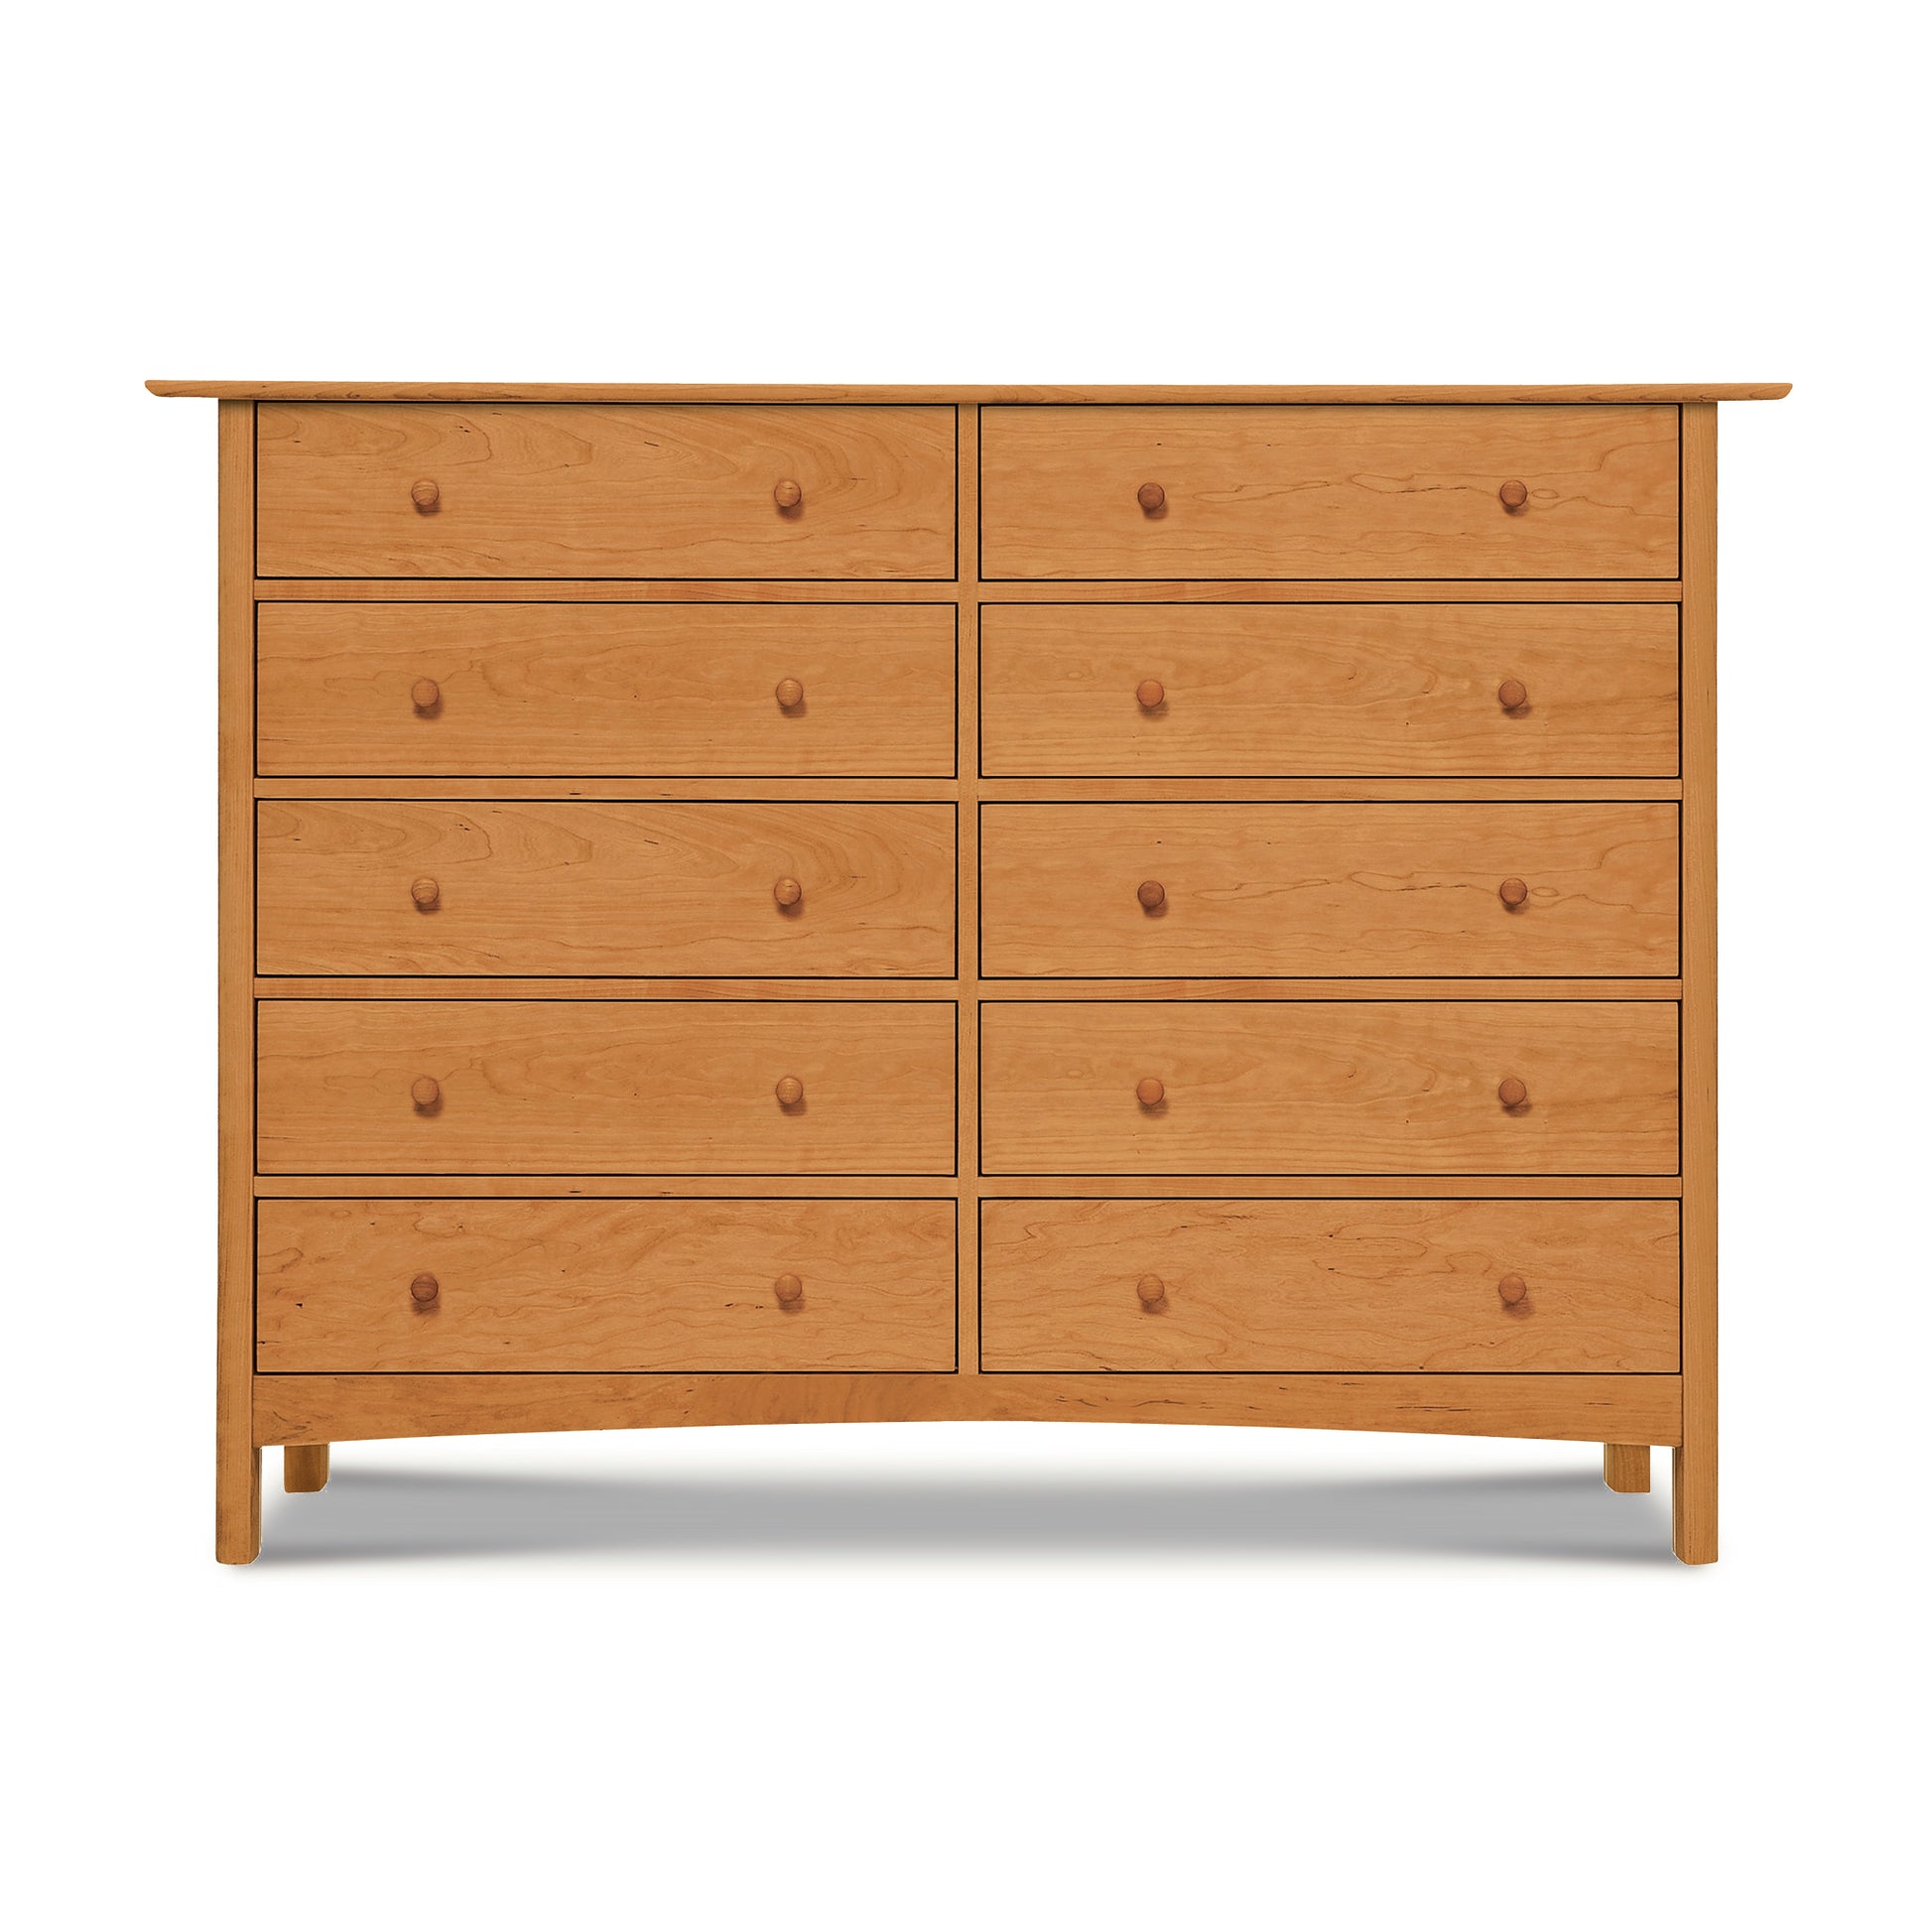 A Heartwood Shaker 10-Drawer Dresser from the Vermont Furniture Designs Modern Shaker Furniture Collection, featuring a simple design and round knobs, isolated on a white background.